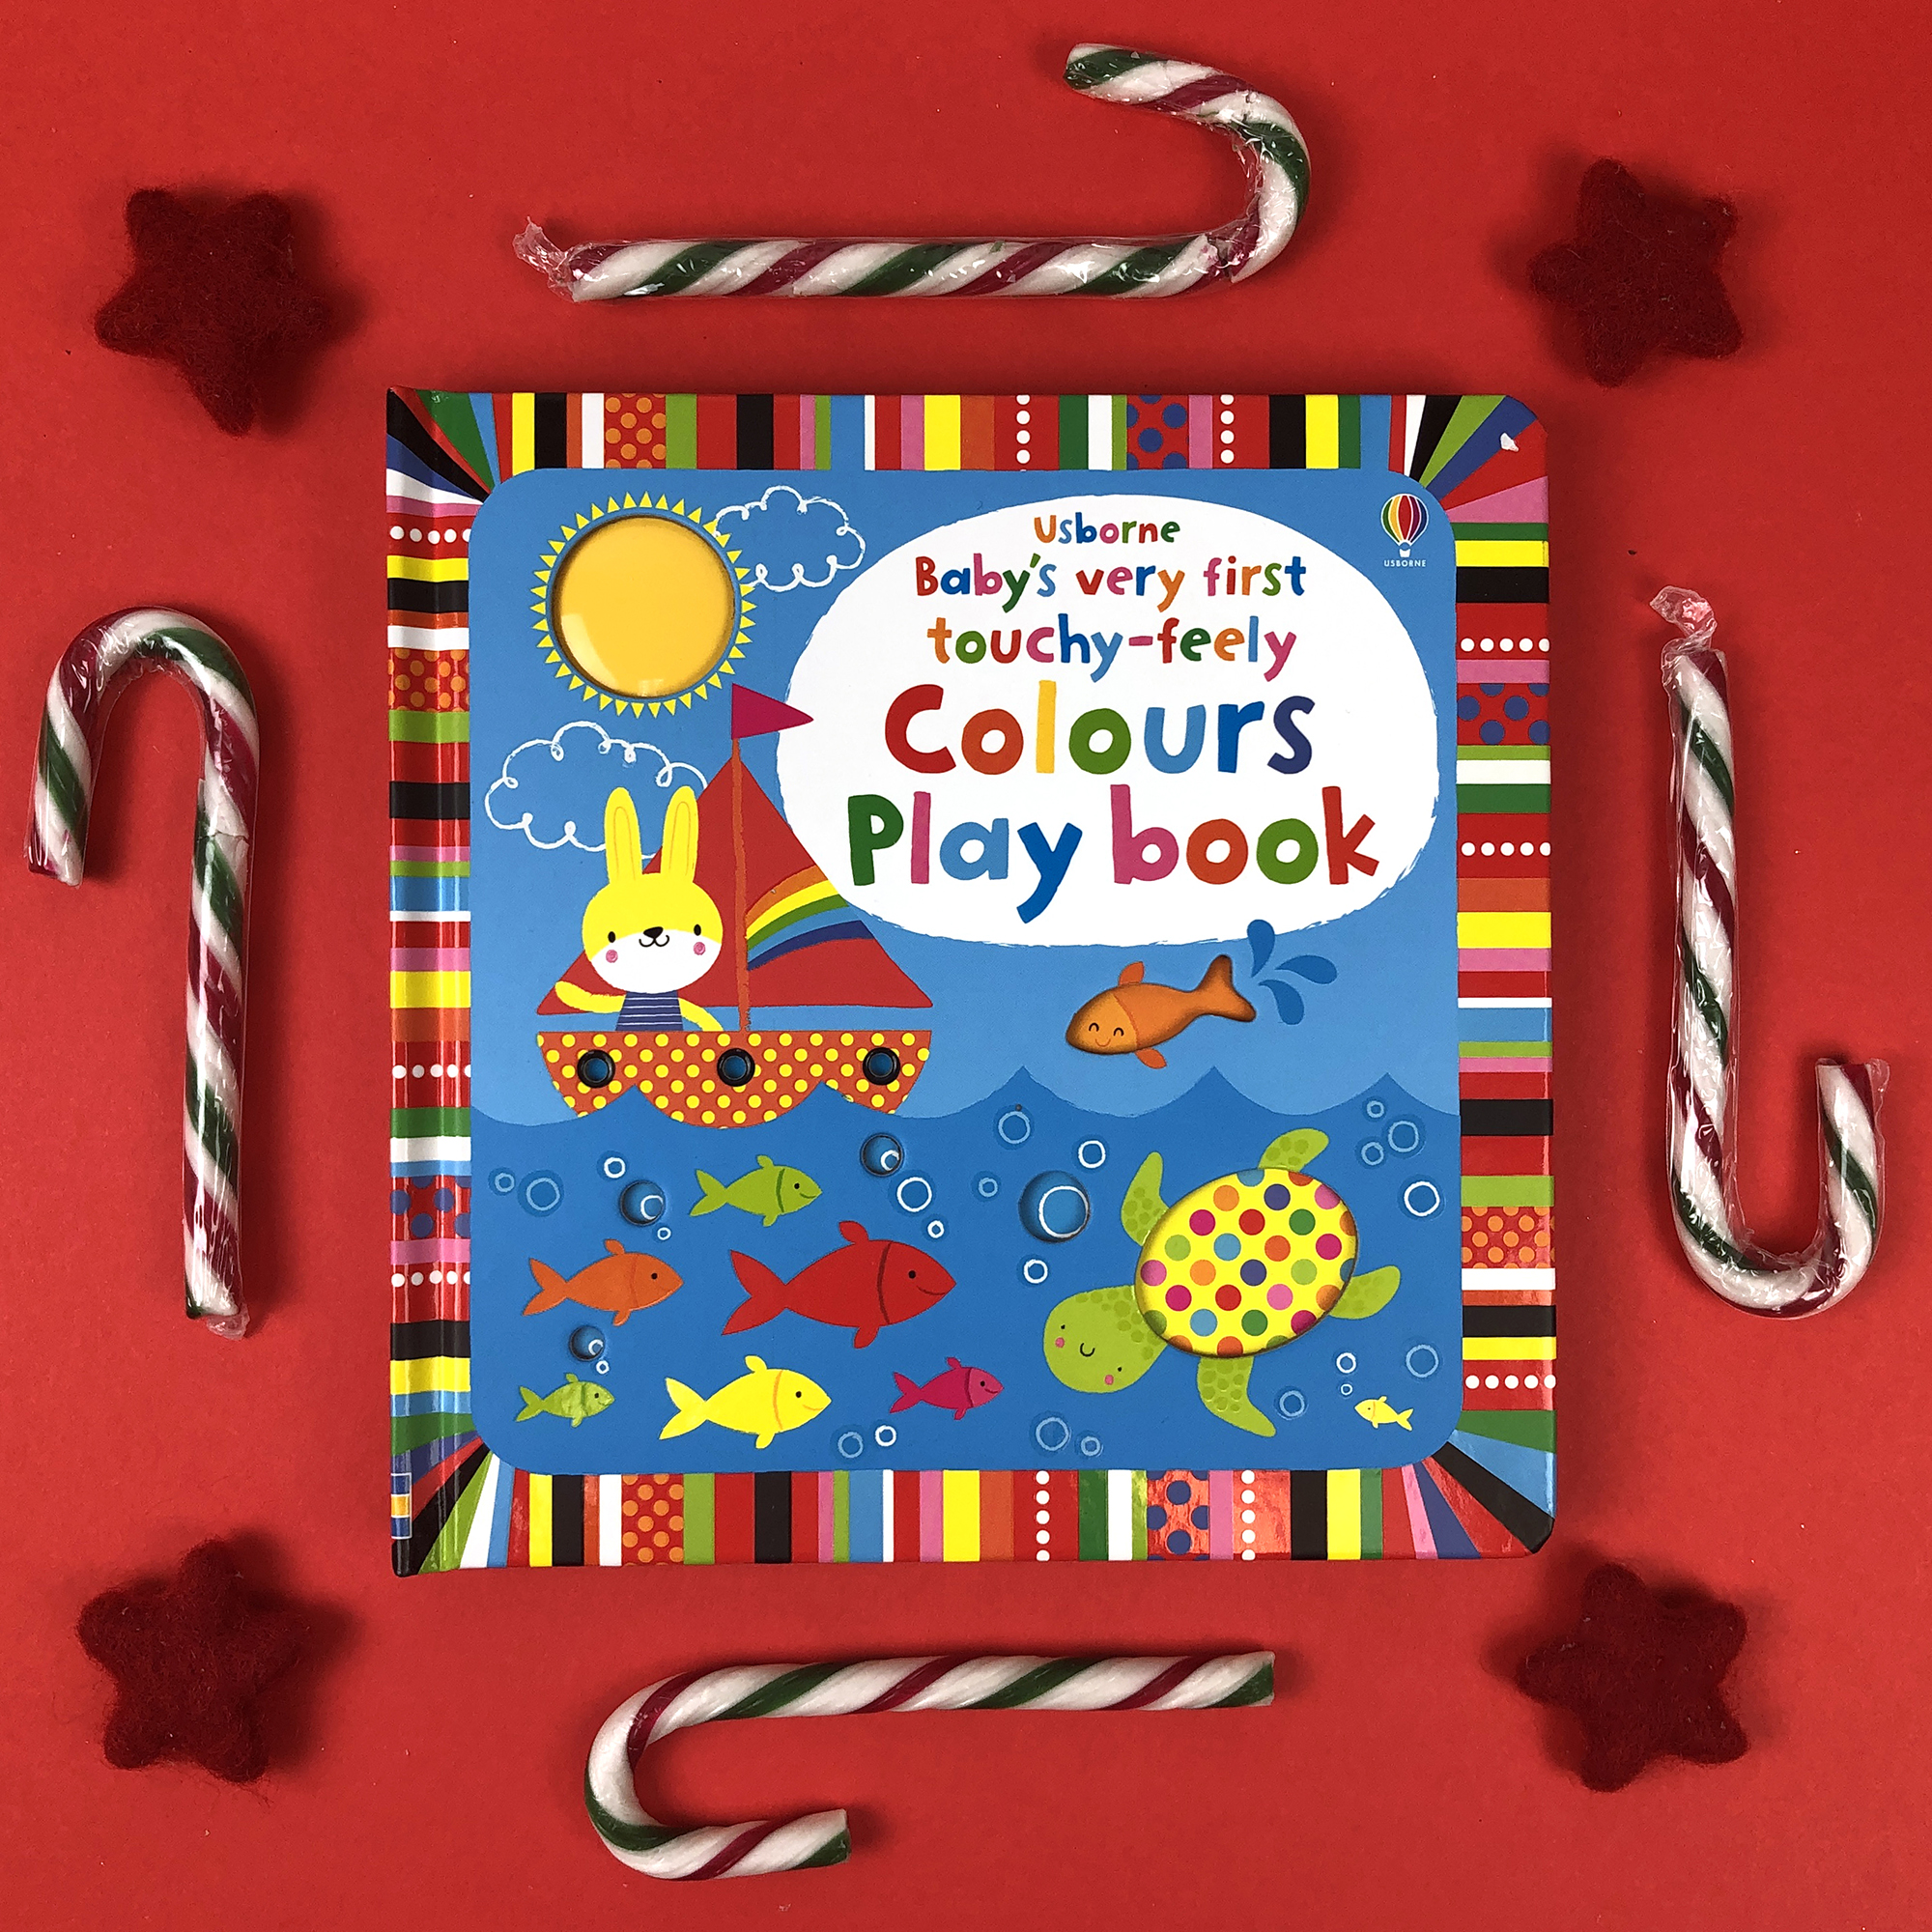 Baby's very first touchy-feely colours playbook